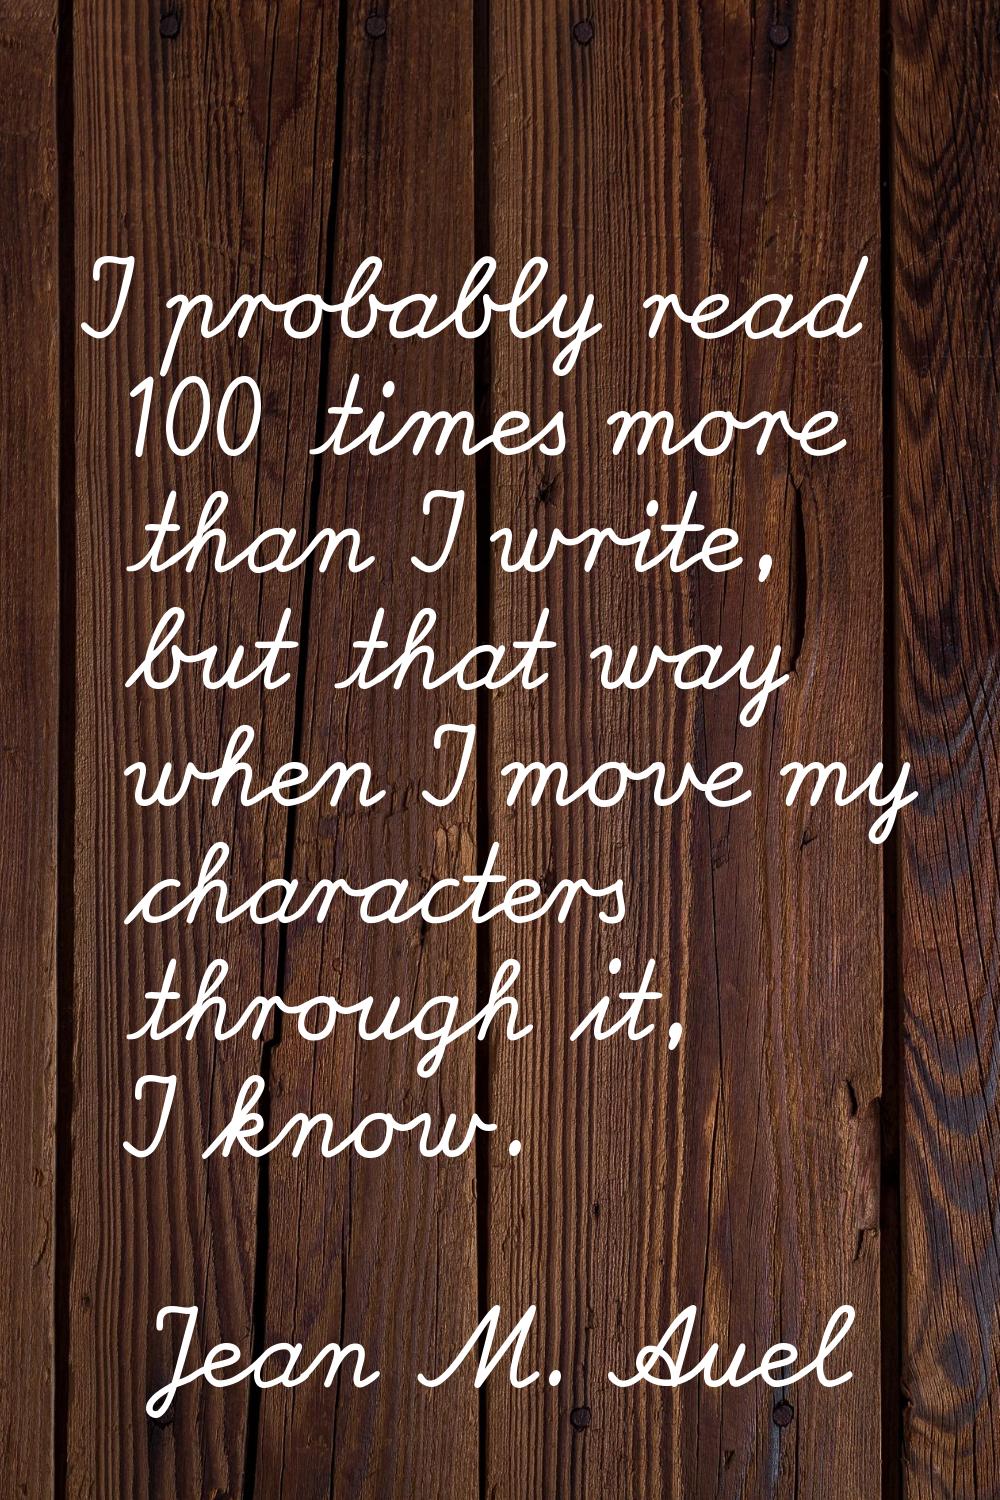 I probably read 100 times more than I write, but that way when I move my characters through it, I k